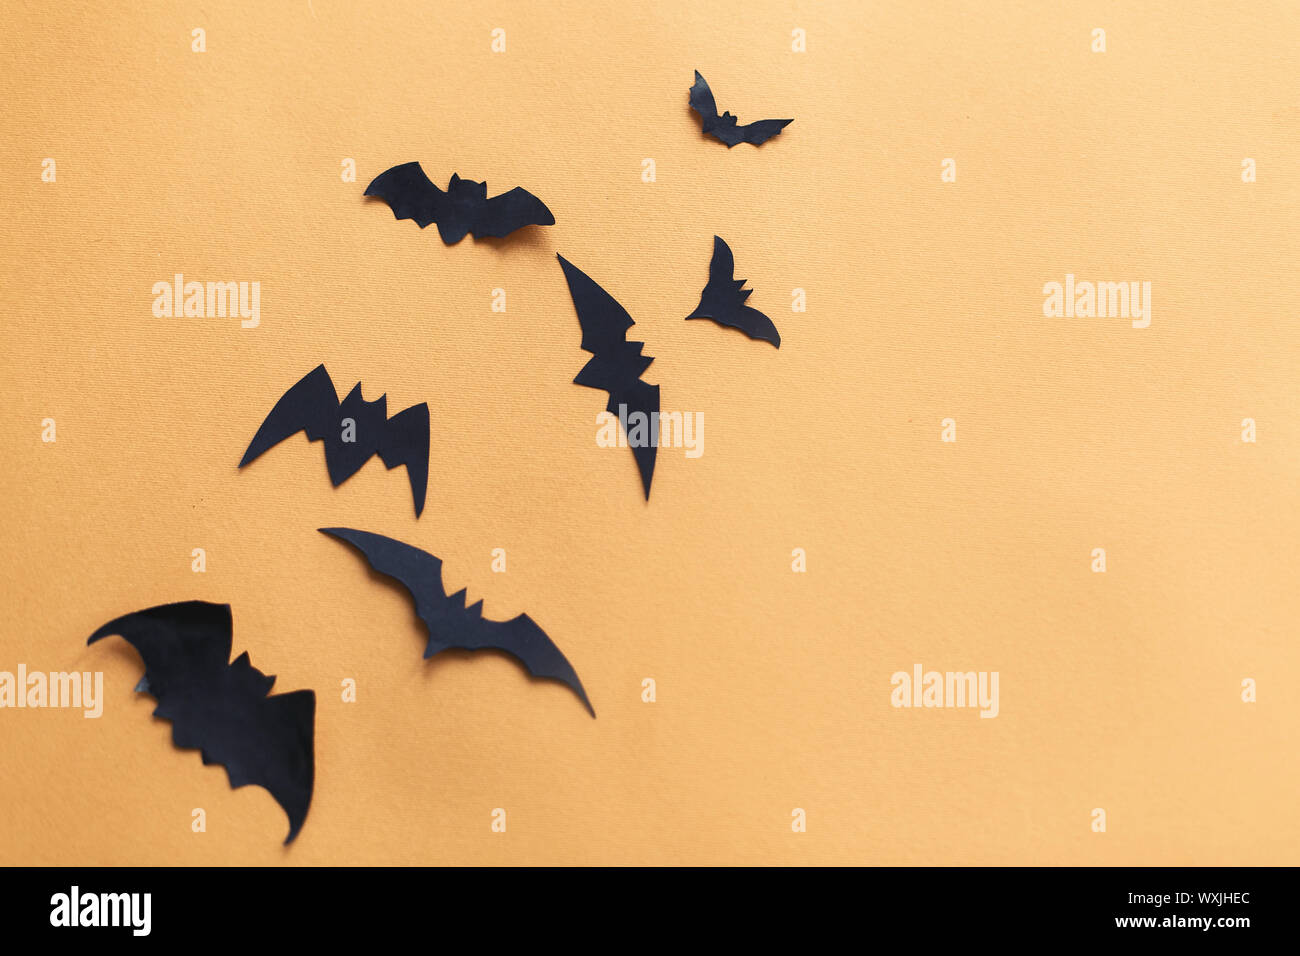 Halloween flat lay. Black paper bats flying on yellow paper background, copy space. Modern spooky halloween decorations. Minimalistic flat lay Stock Photo